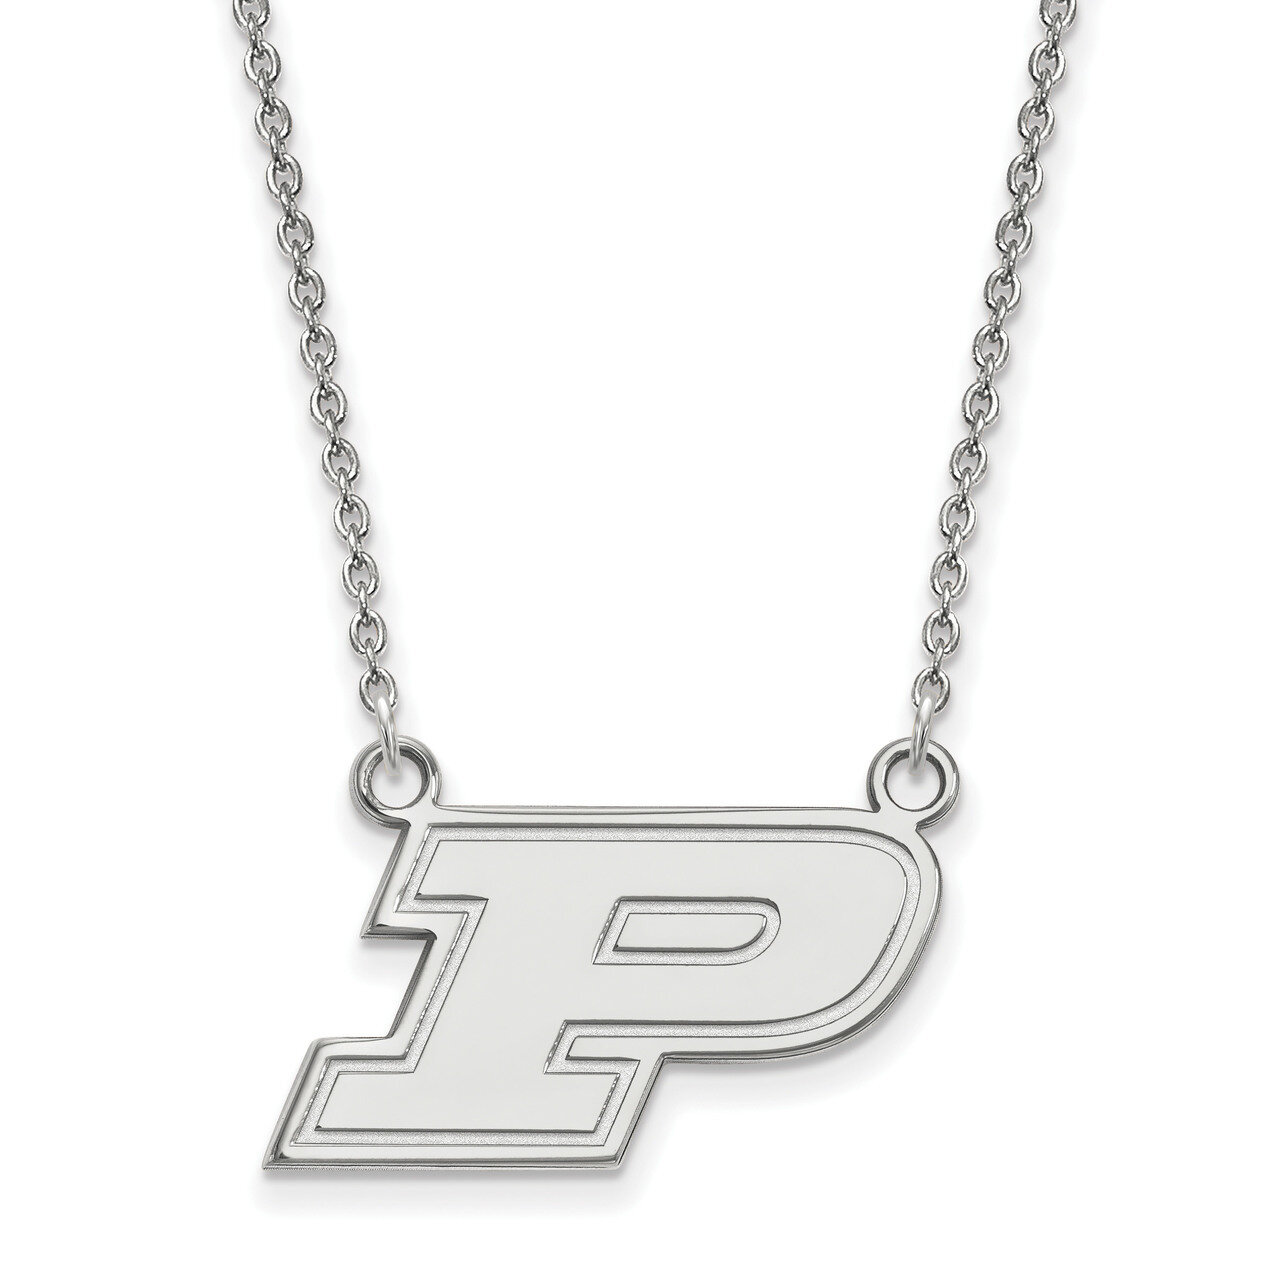 Purdue Small Pendant with Necklace 10k White Gold 1W014PU-18